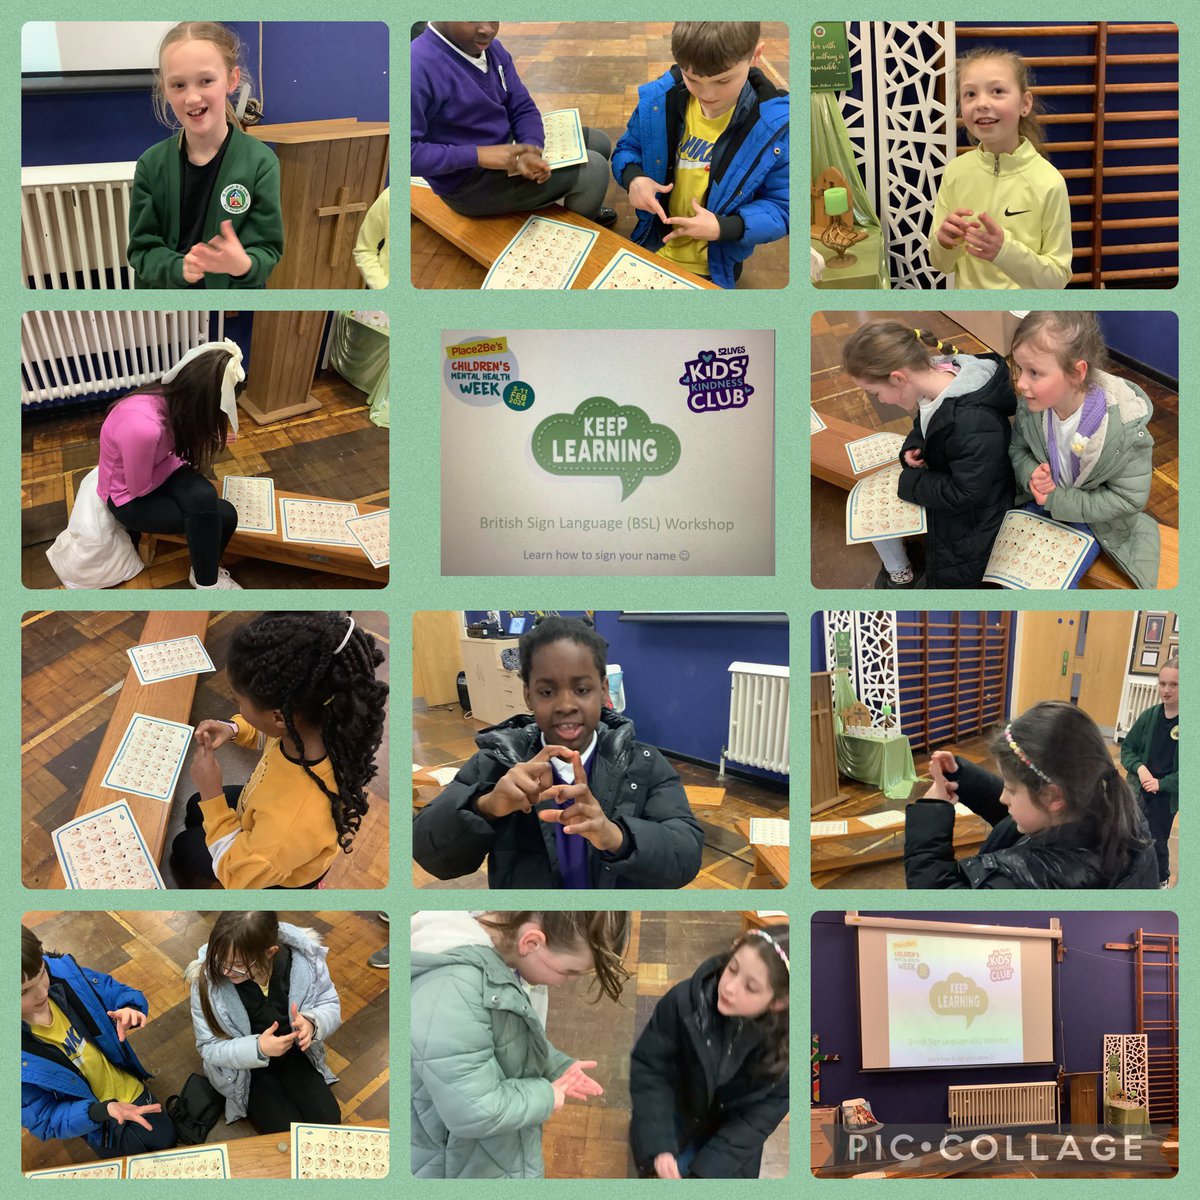 Our Kindness Club members kick-started #ChildrensMentalHealthWeek by helping their friends to learn something new this lunch time. They ran a workshop teaching each other how to sign their name using British Sign Language. @sjsbmh @Place2Be @myHappymind_ #sjsbSMSC #sjsbPSHE